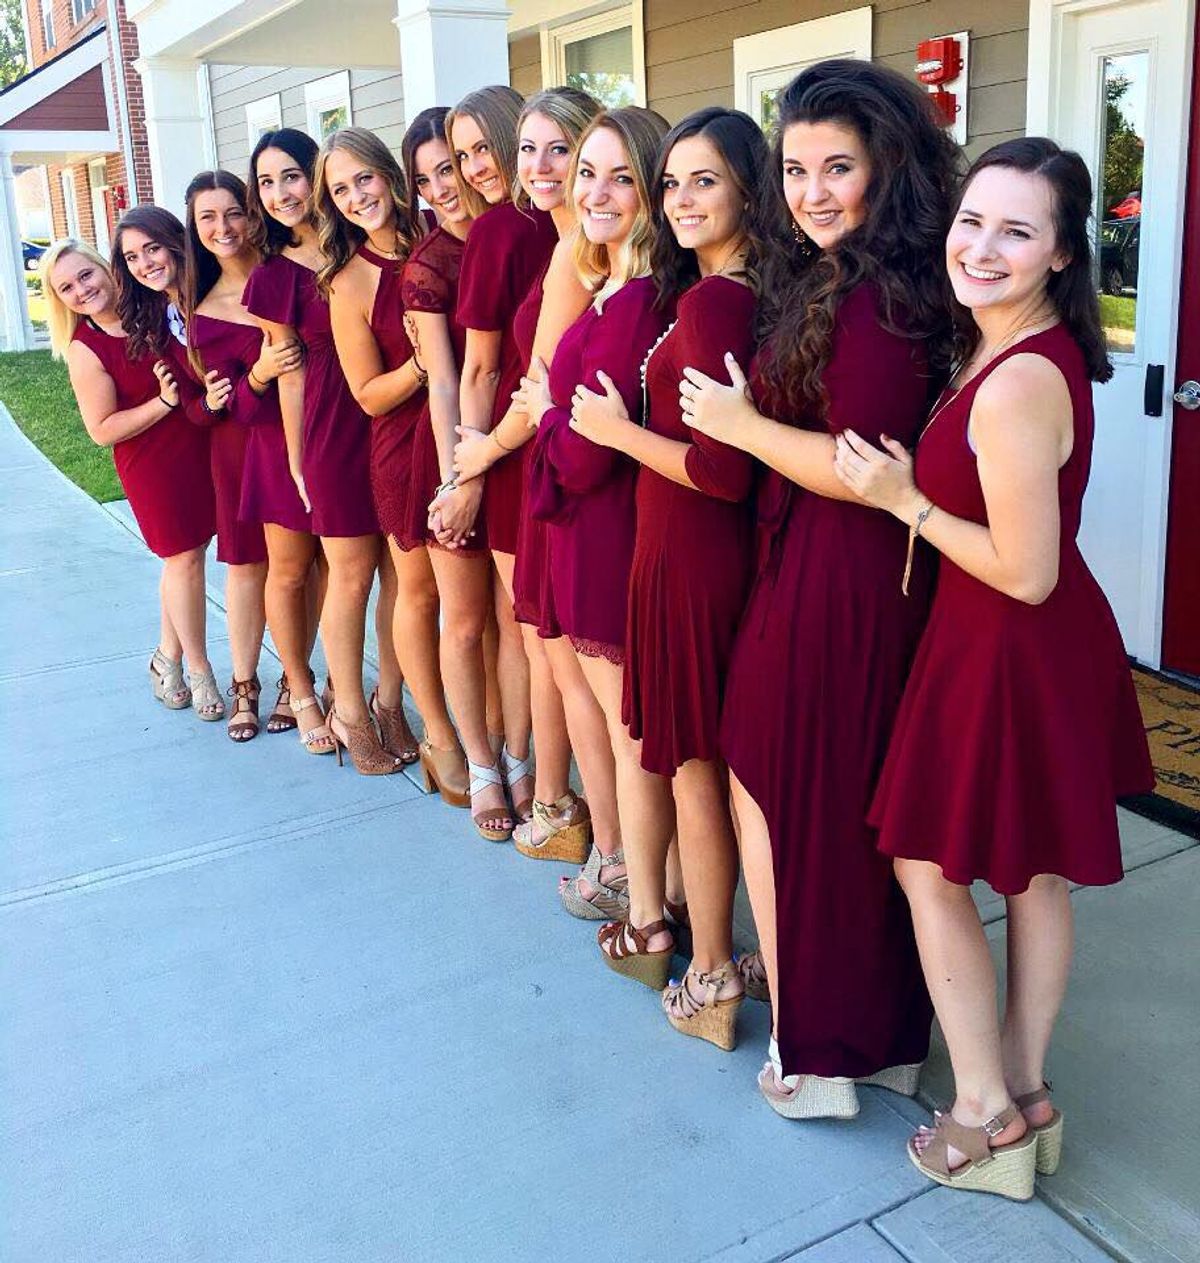 22 Tips For My Sorority Sisters, From A Graduating Senior